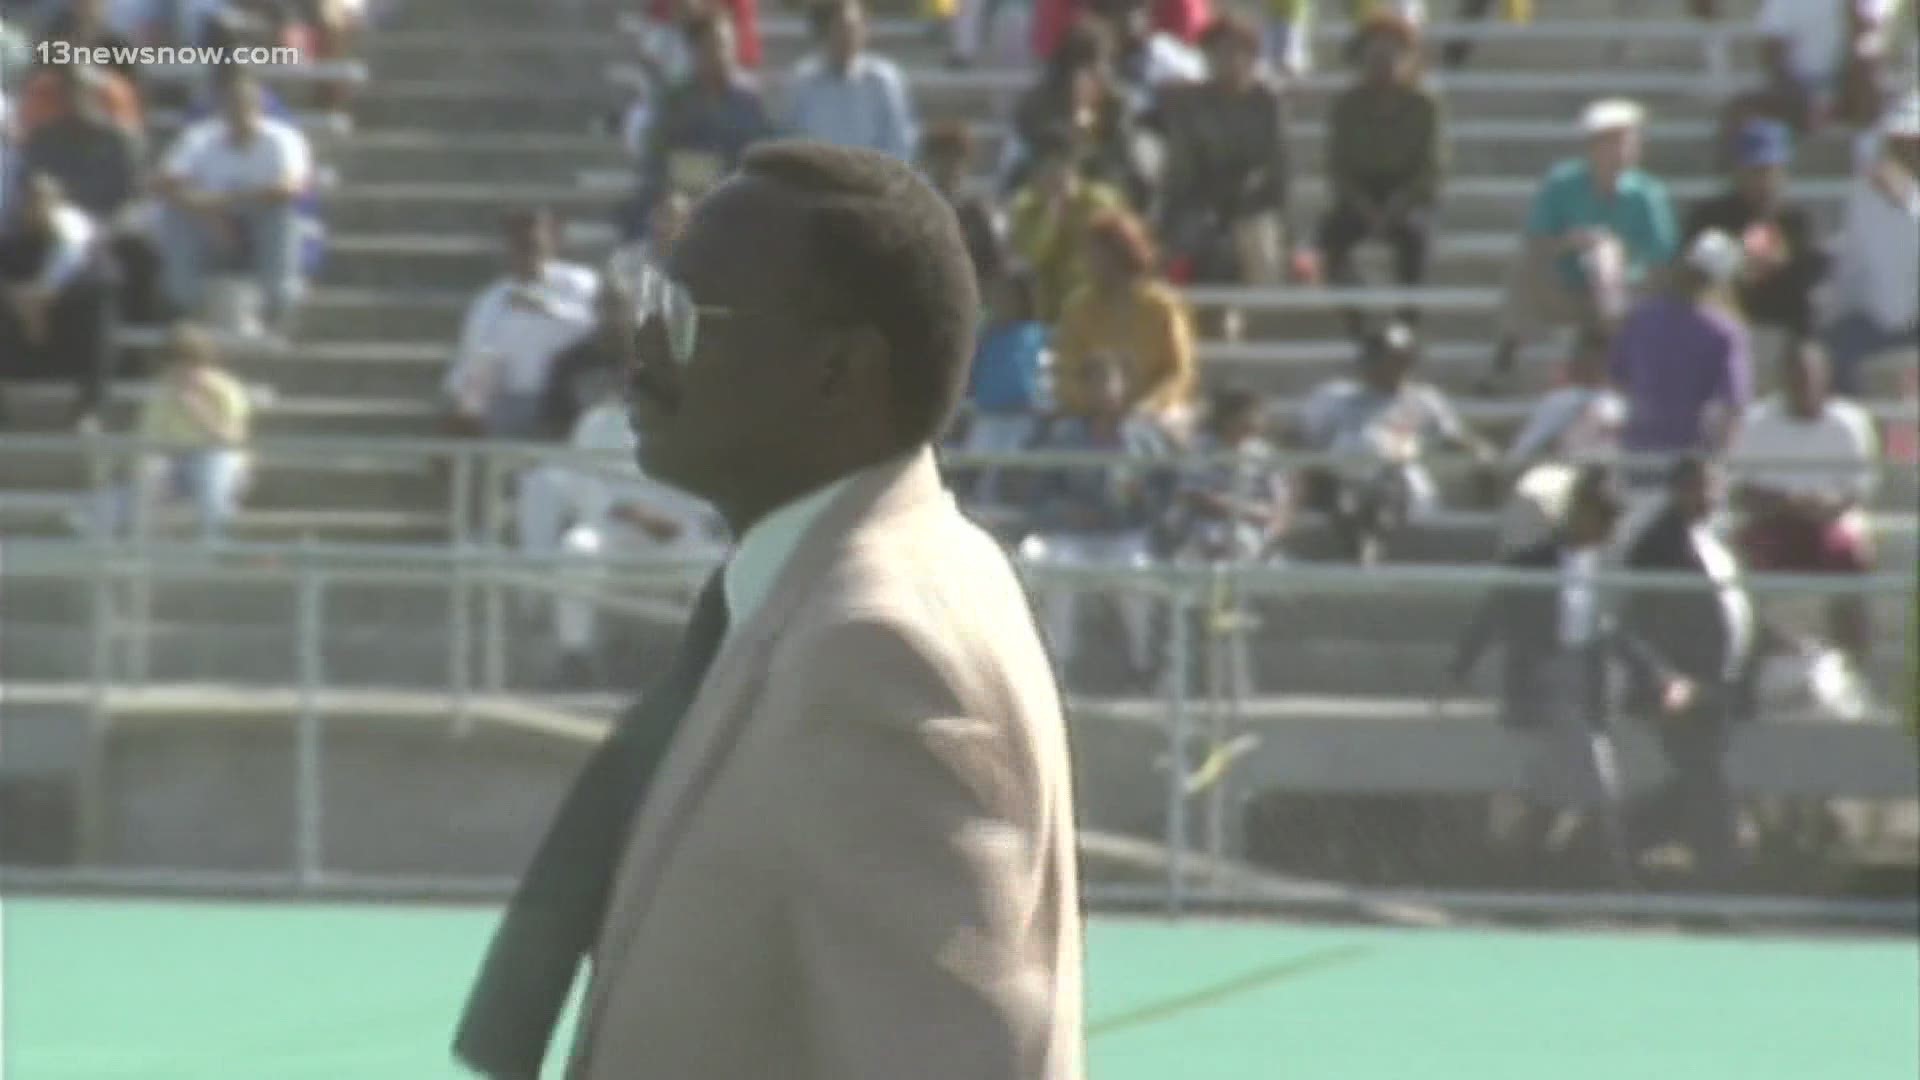 The former Norfolk State University Football Coach, Willard Bailey, was inducted into the 2021 Black College Football Hall of Fame.